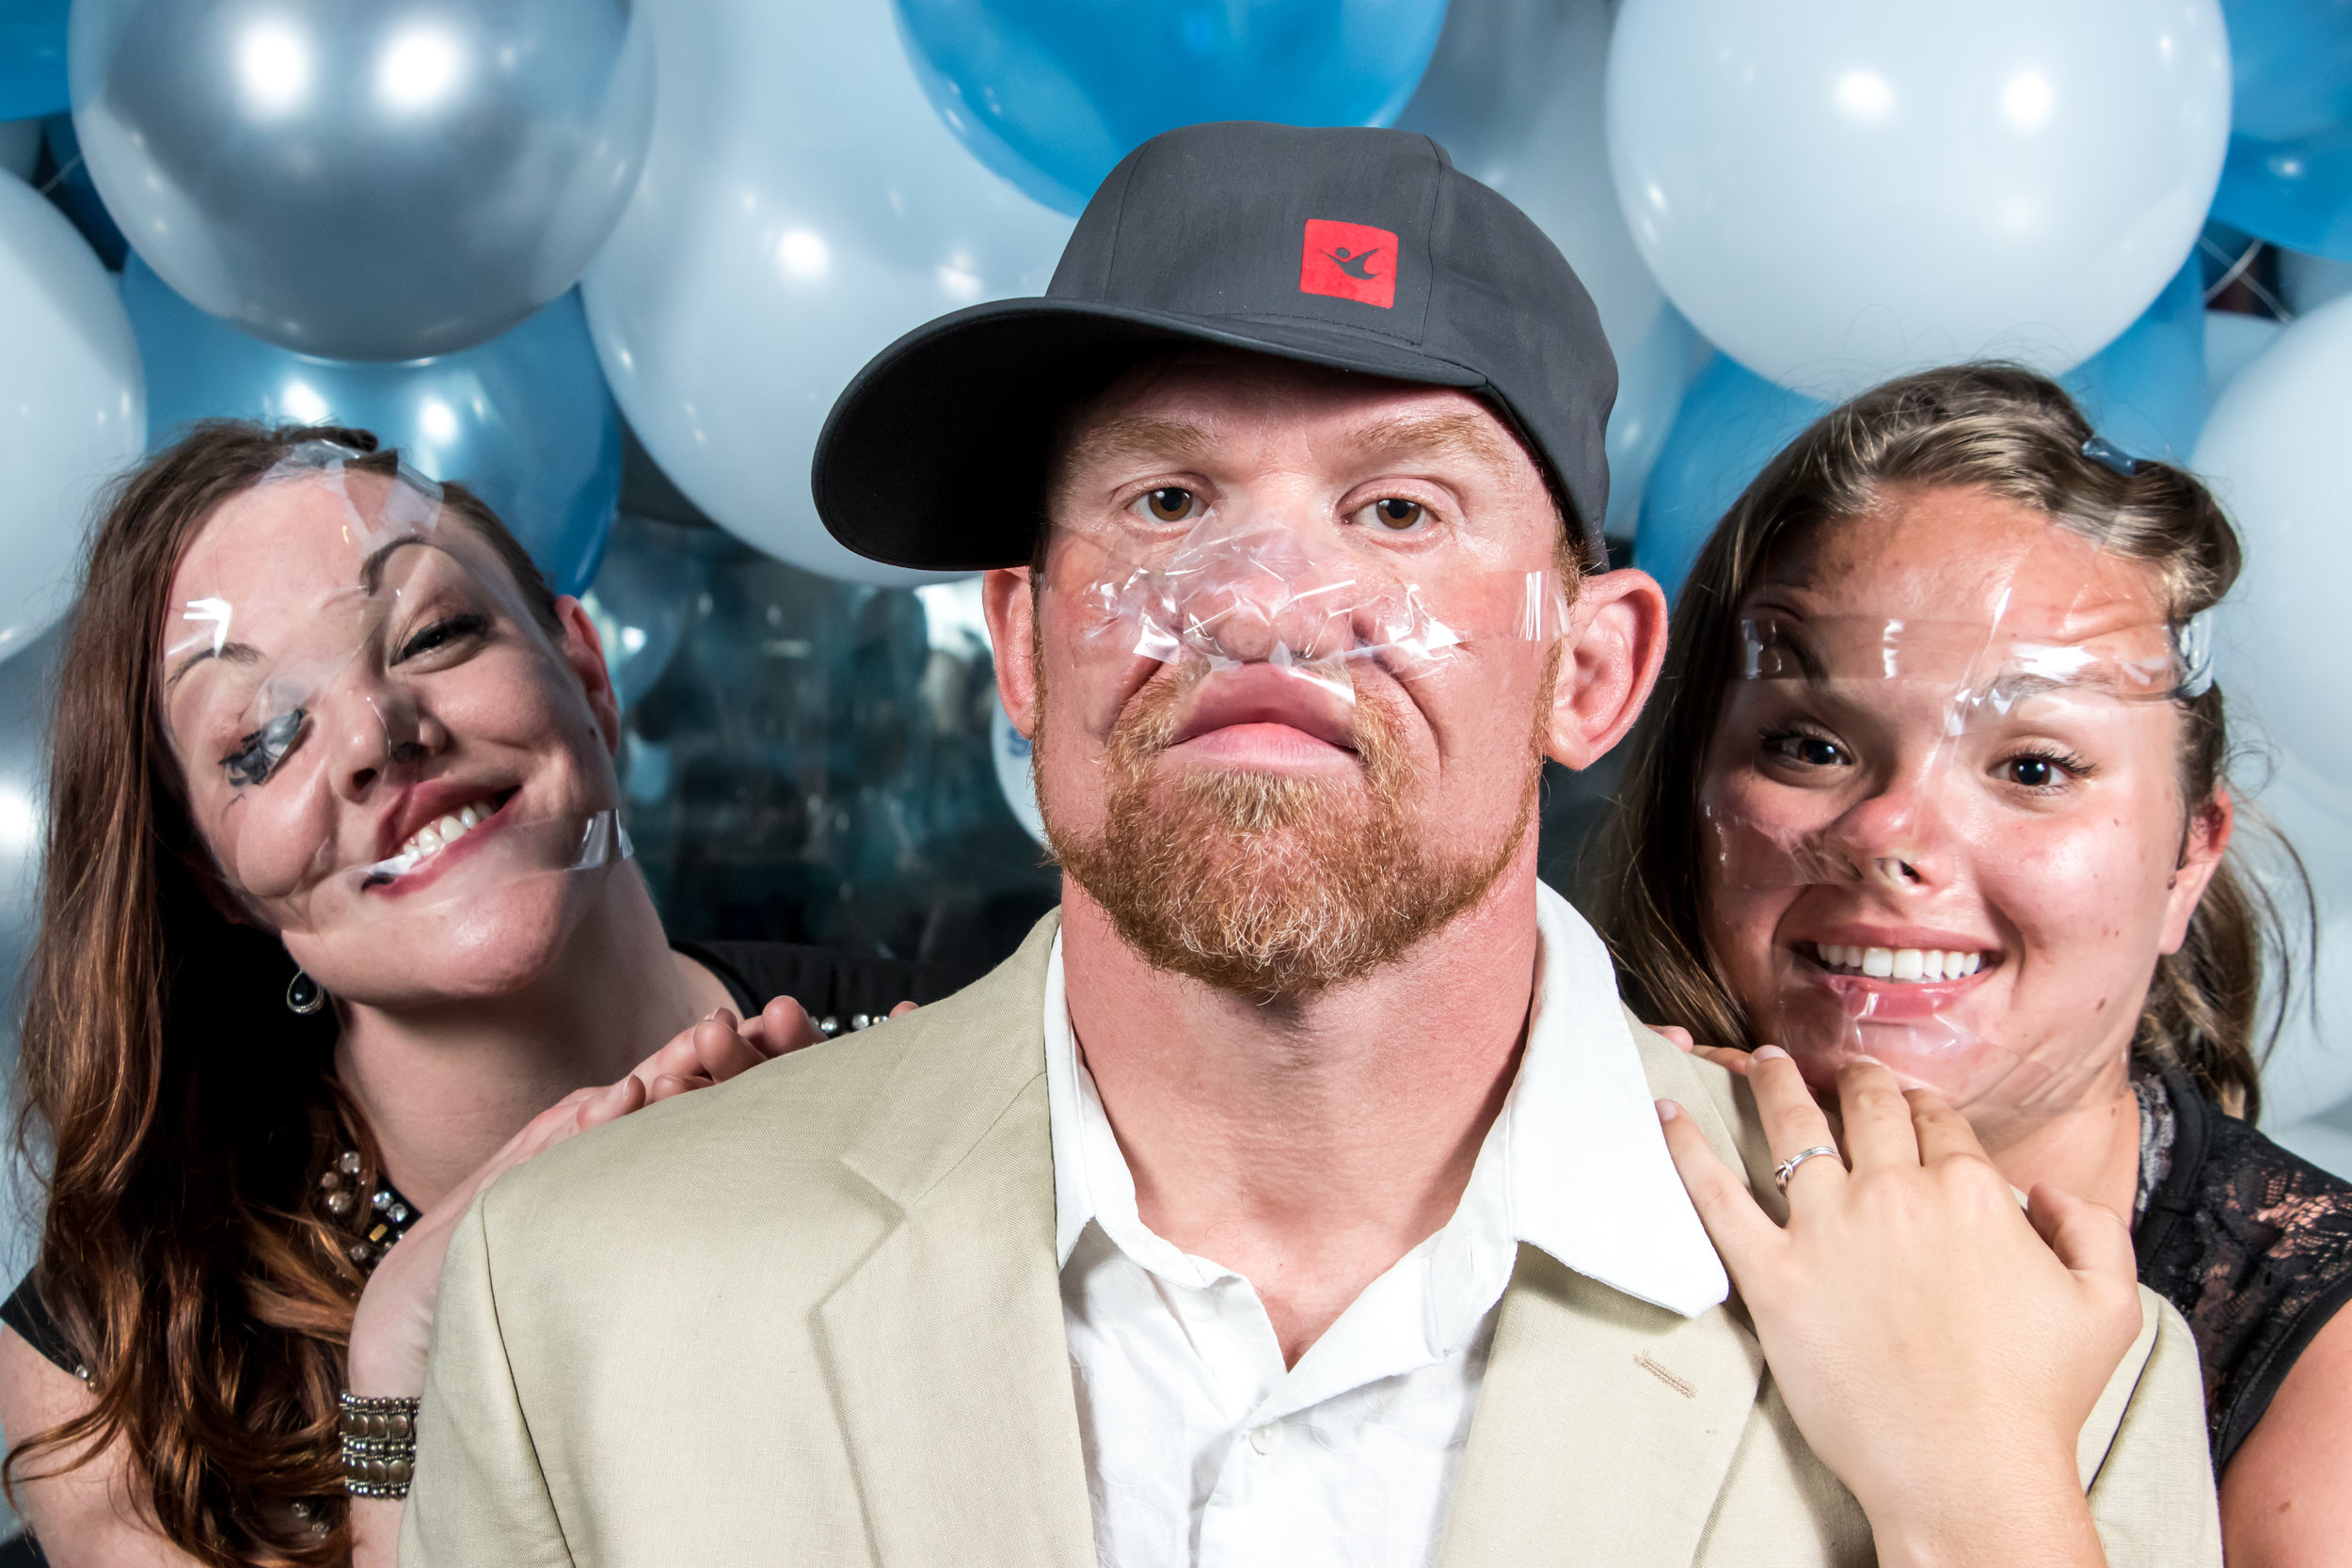 HKP-Website-iFLY-Tampa-Tape-Face-Spring-Formal-Teambuilding-Funny-Portraits-LR-1.jpg